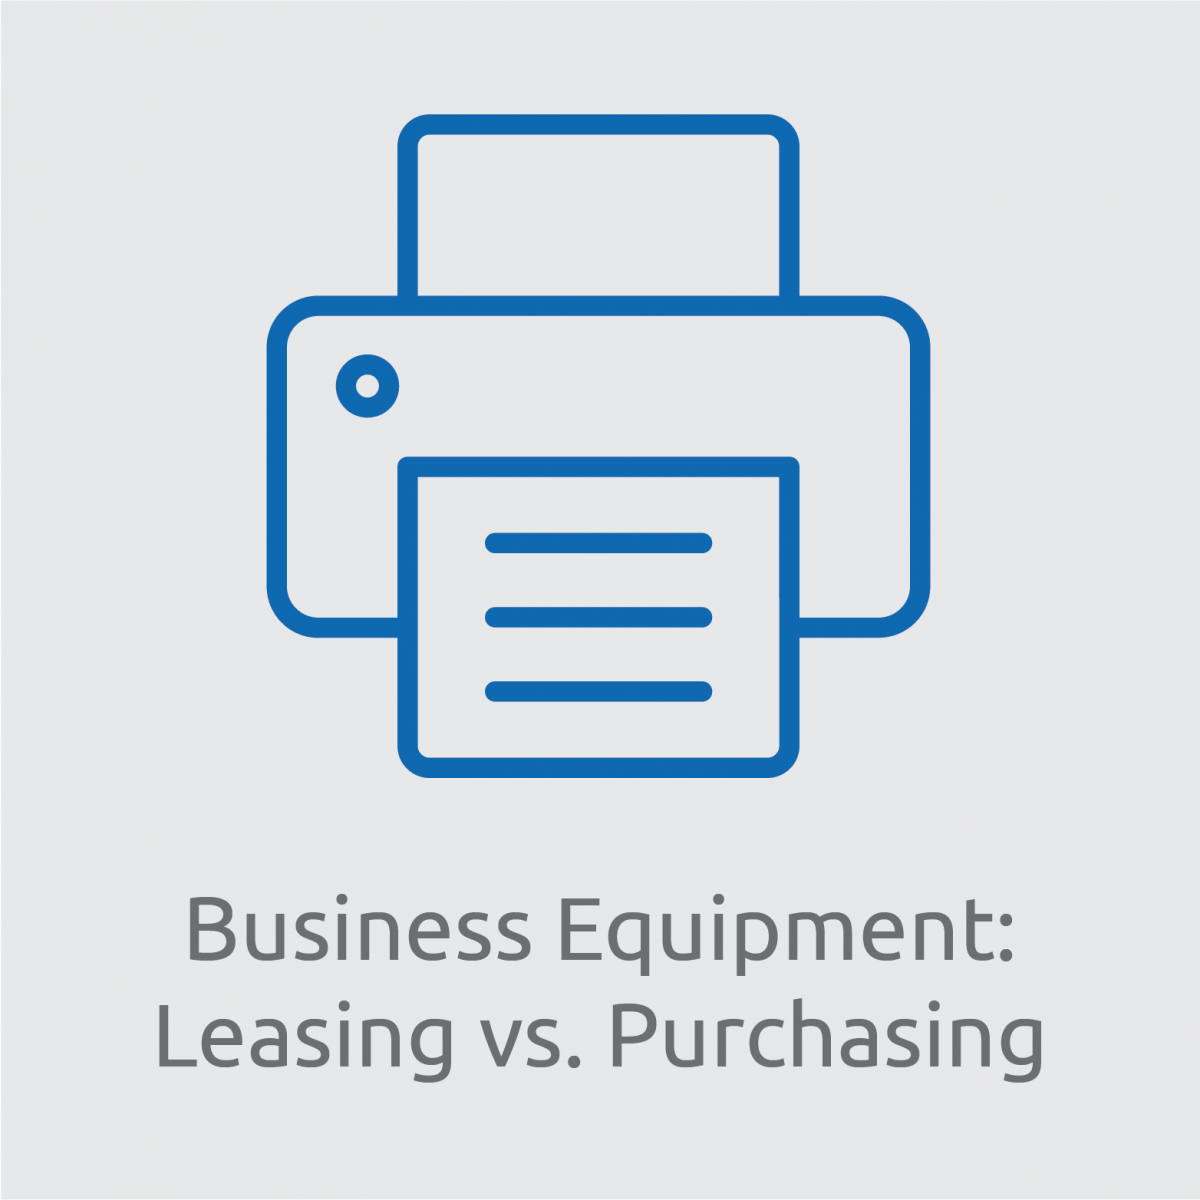 Business Equipment: Buy or Lease